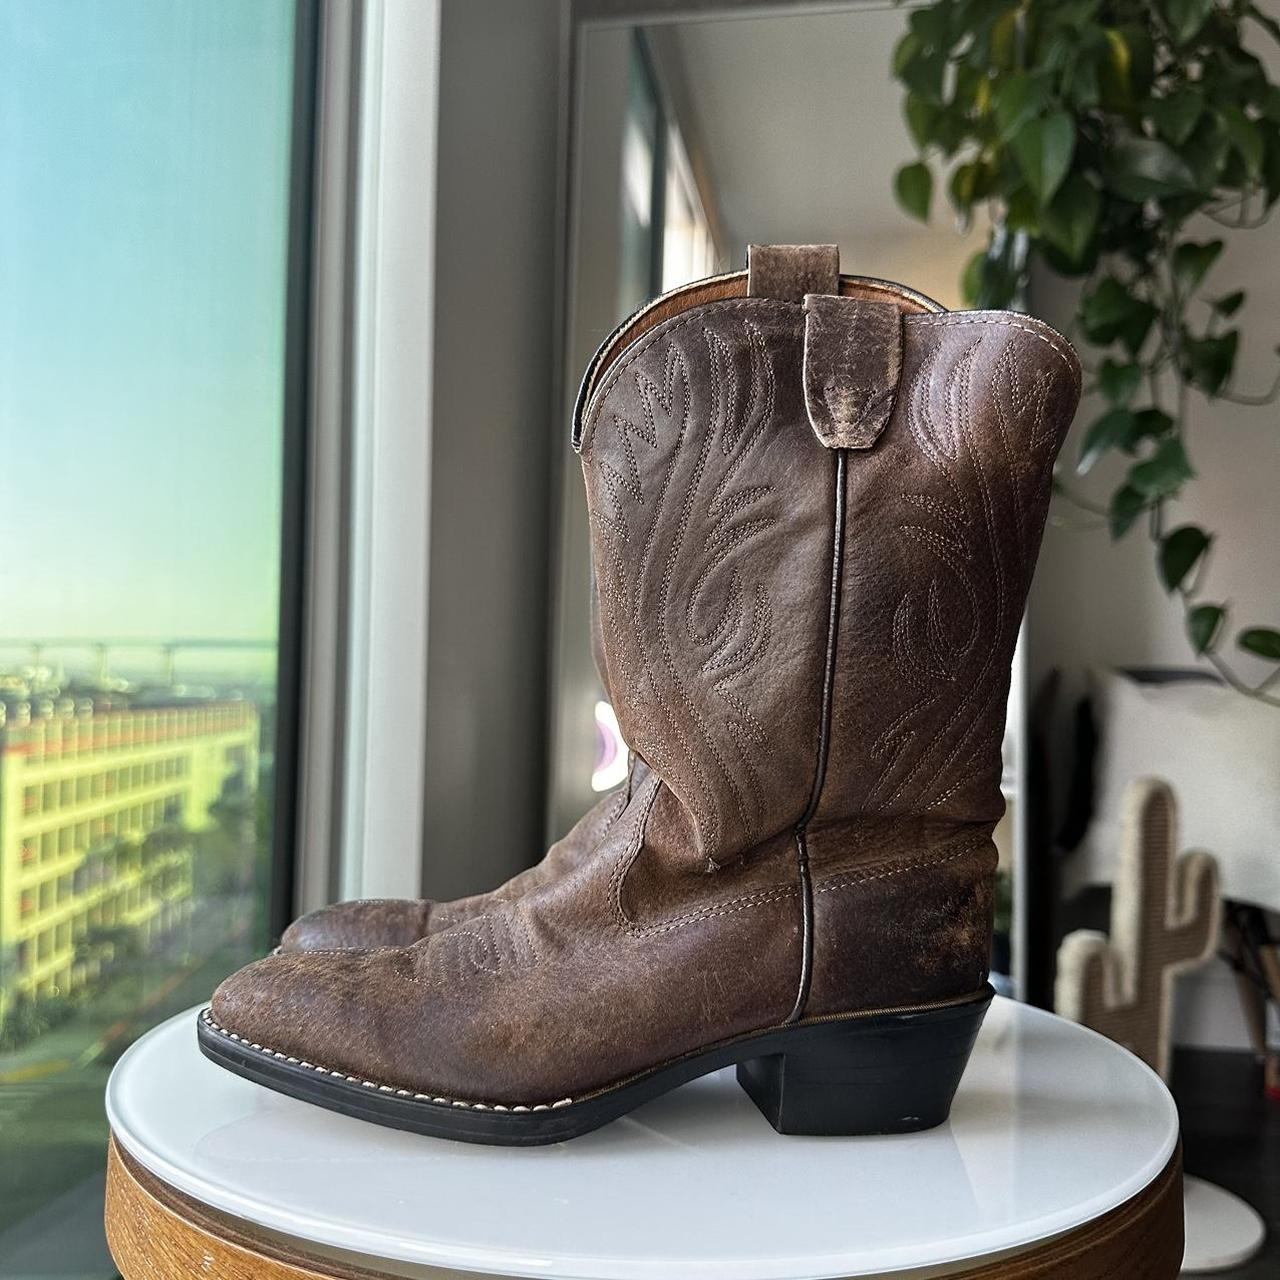 Frye Women's Brown and Black Boots